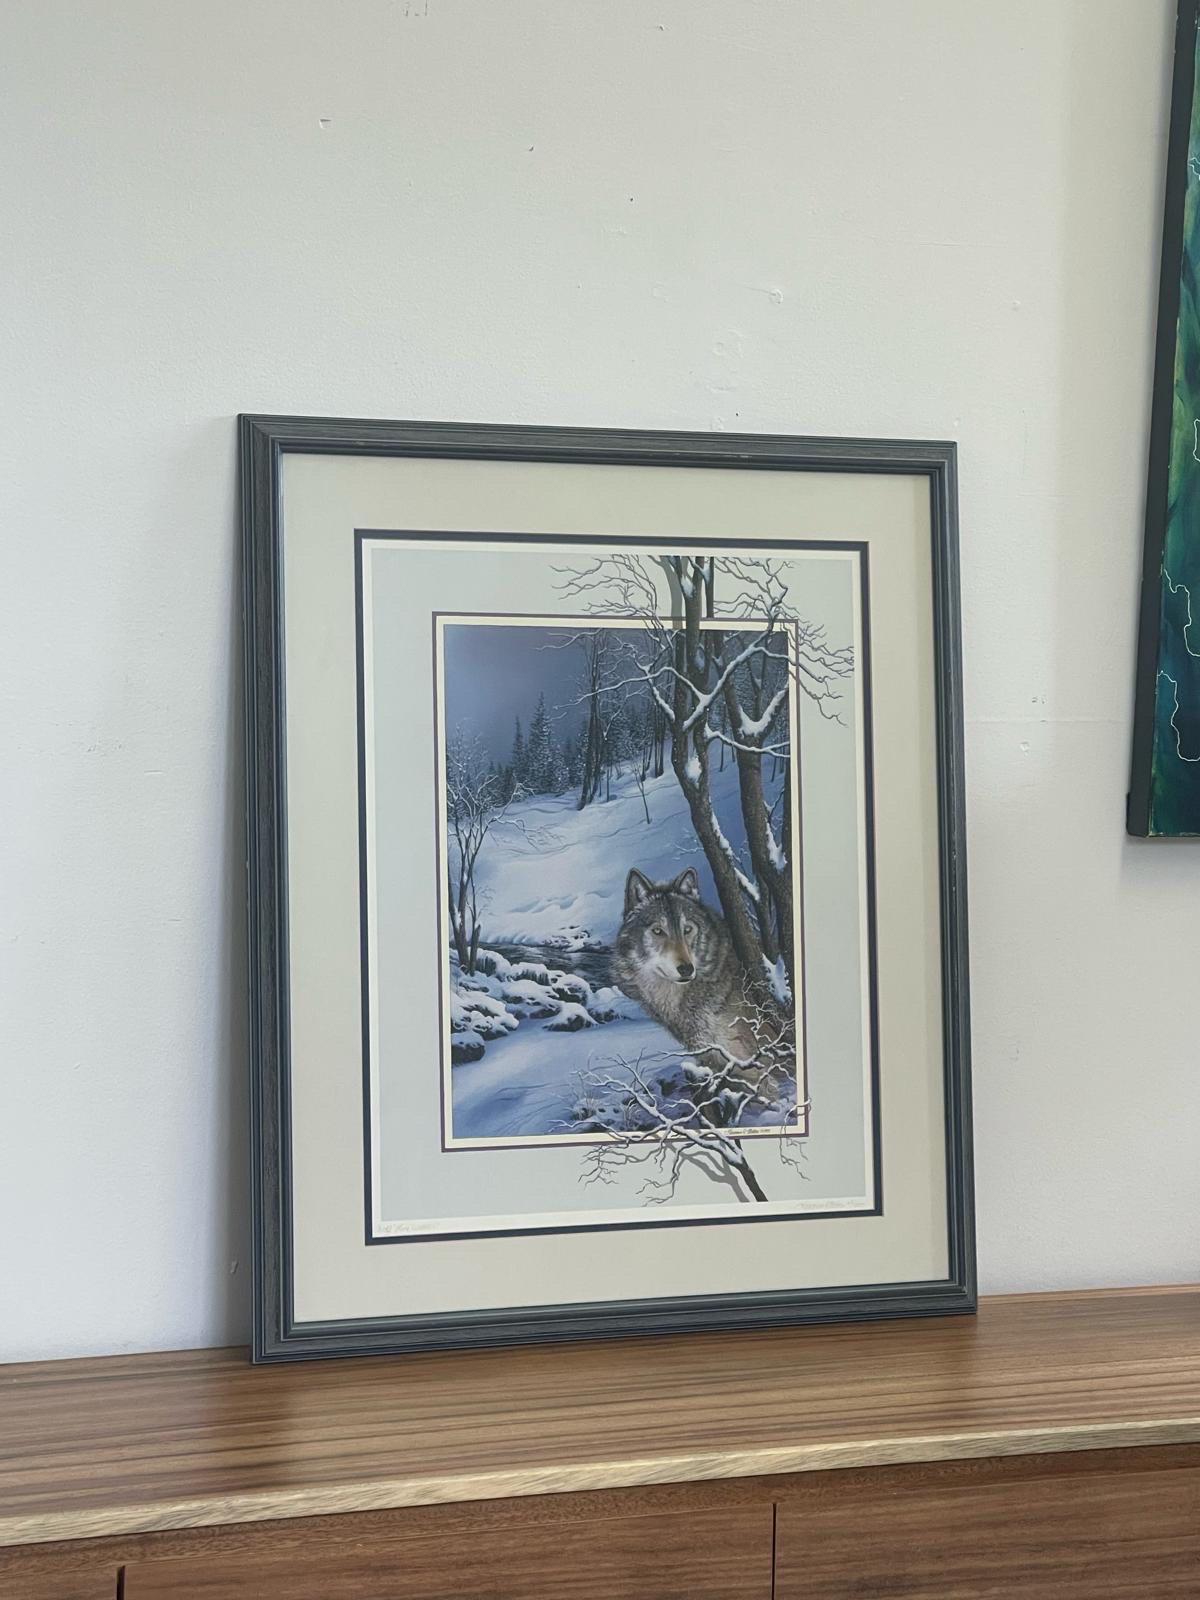 Professionally Framed and Matted Artwork of a Wolf in the Woods. Signed and Numbered and Titled at the Bottom of the Art. Blue Toned Painting Complimented by the Blue Painted Wood Framing. Vintage Condition Consistent with Age as